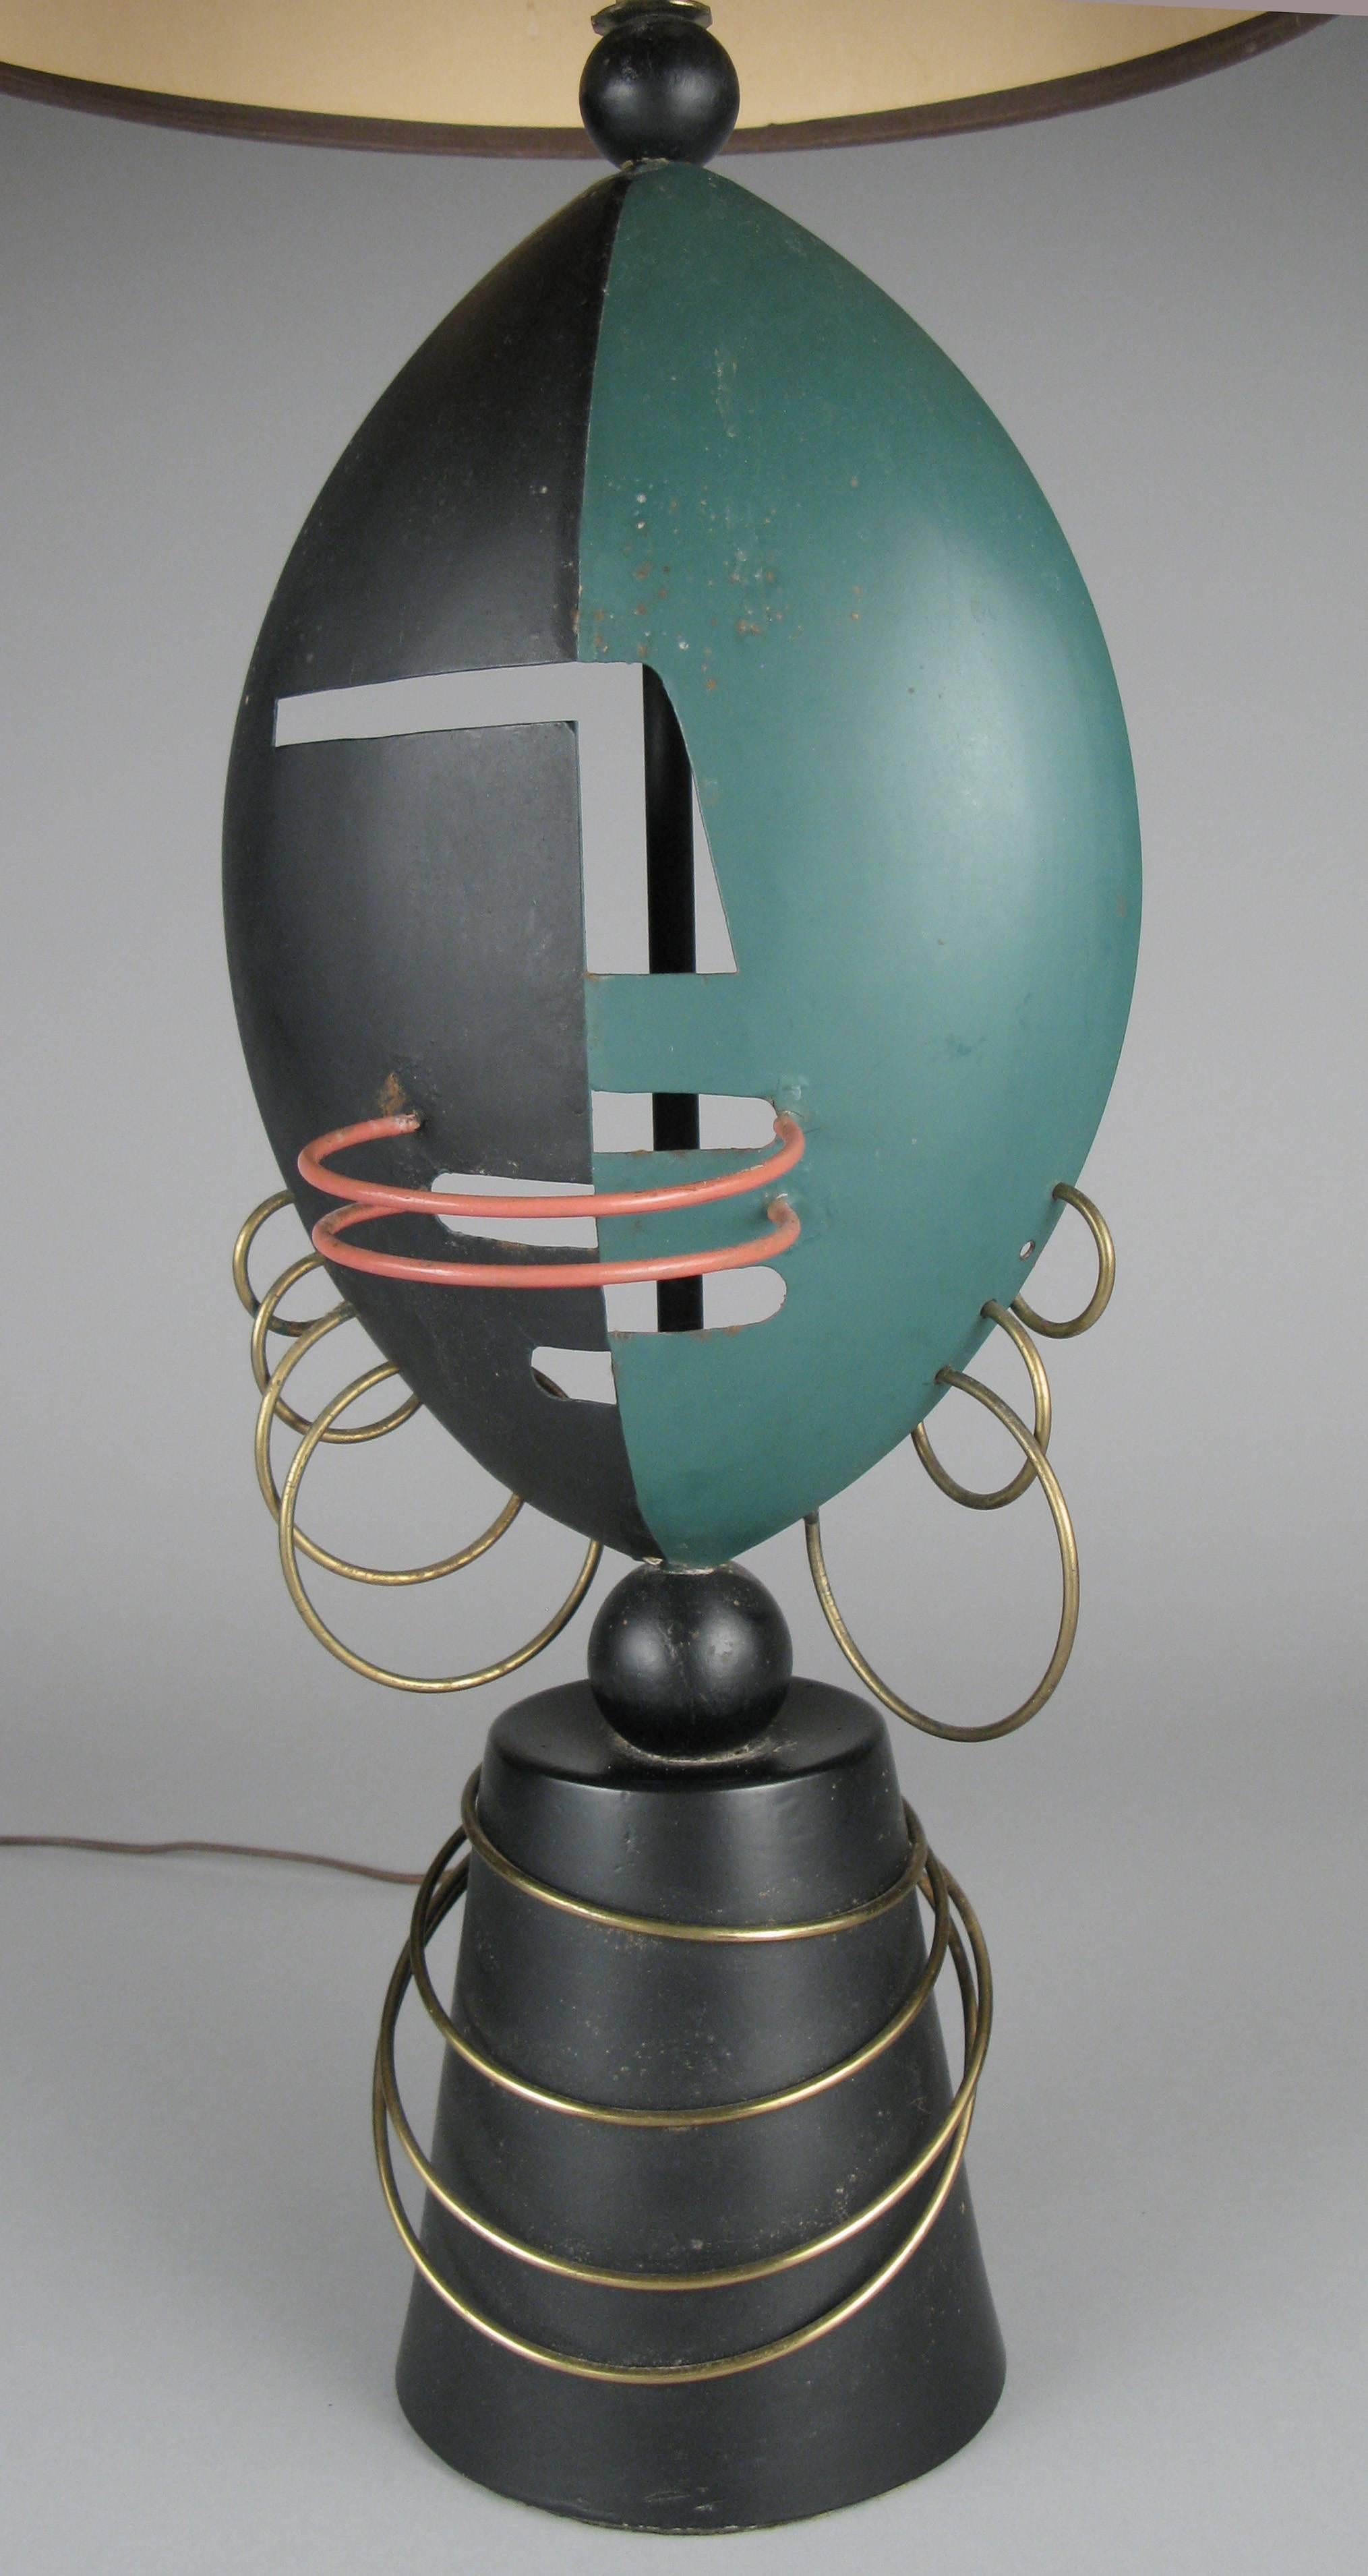 A very unique and interesting vintage 1950s table lamp, made in the form of a modern cubist interpretation of an African tribal mask.